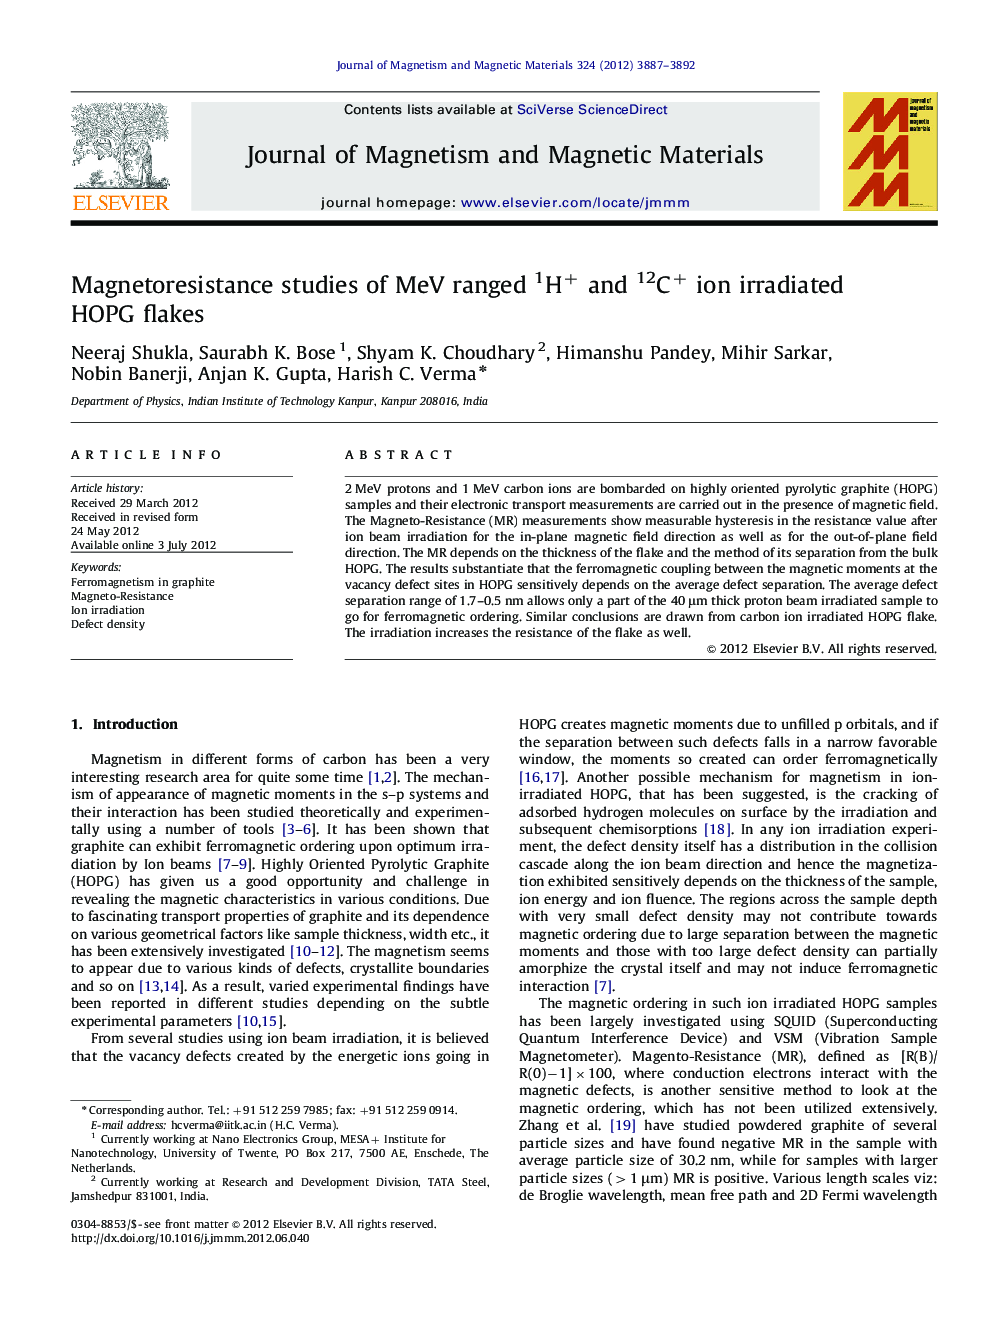 Magnetoresistance studies of MeV ranged 1H+ and 12C+ ion irradiated HOPG flakes